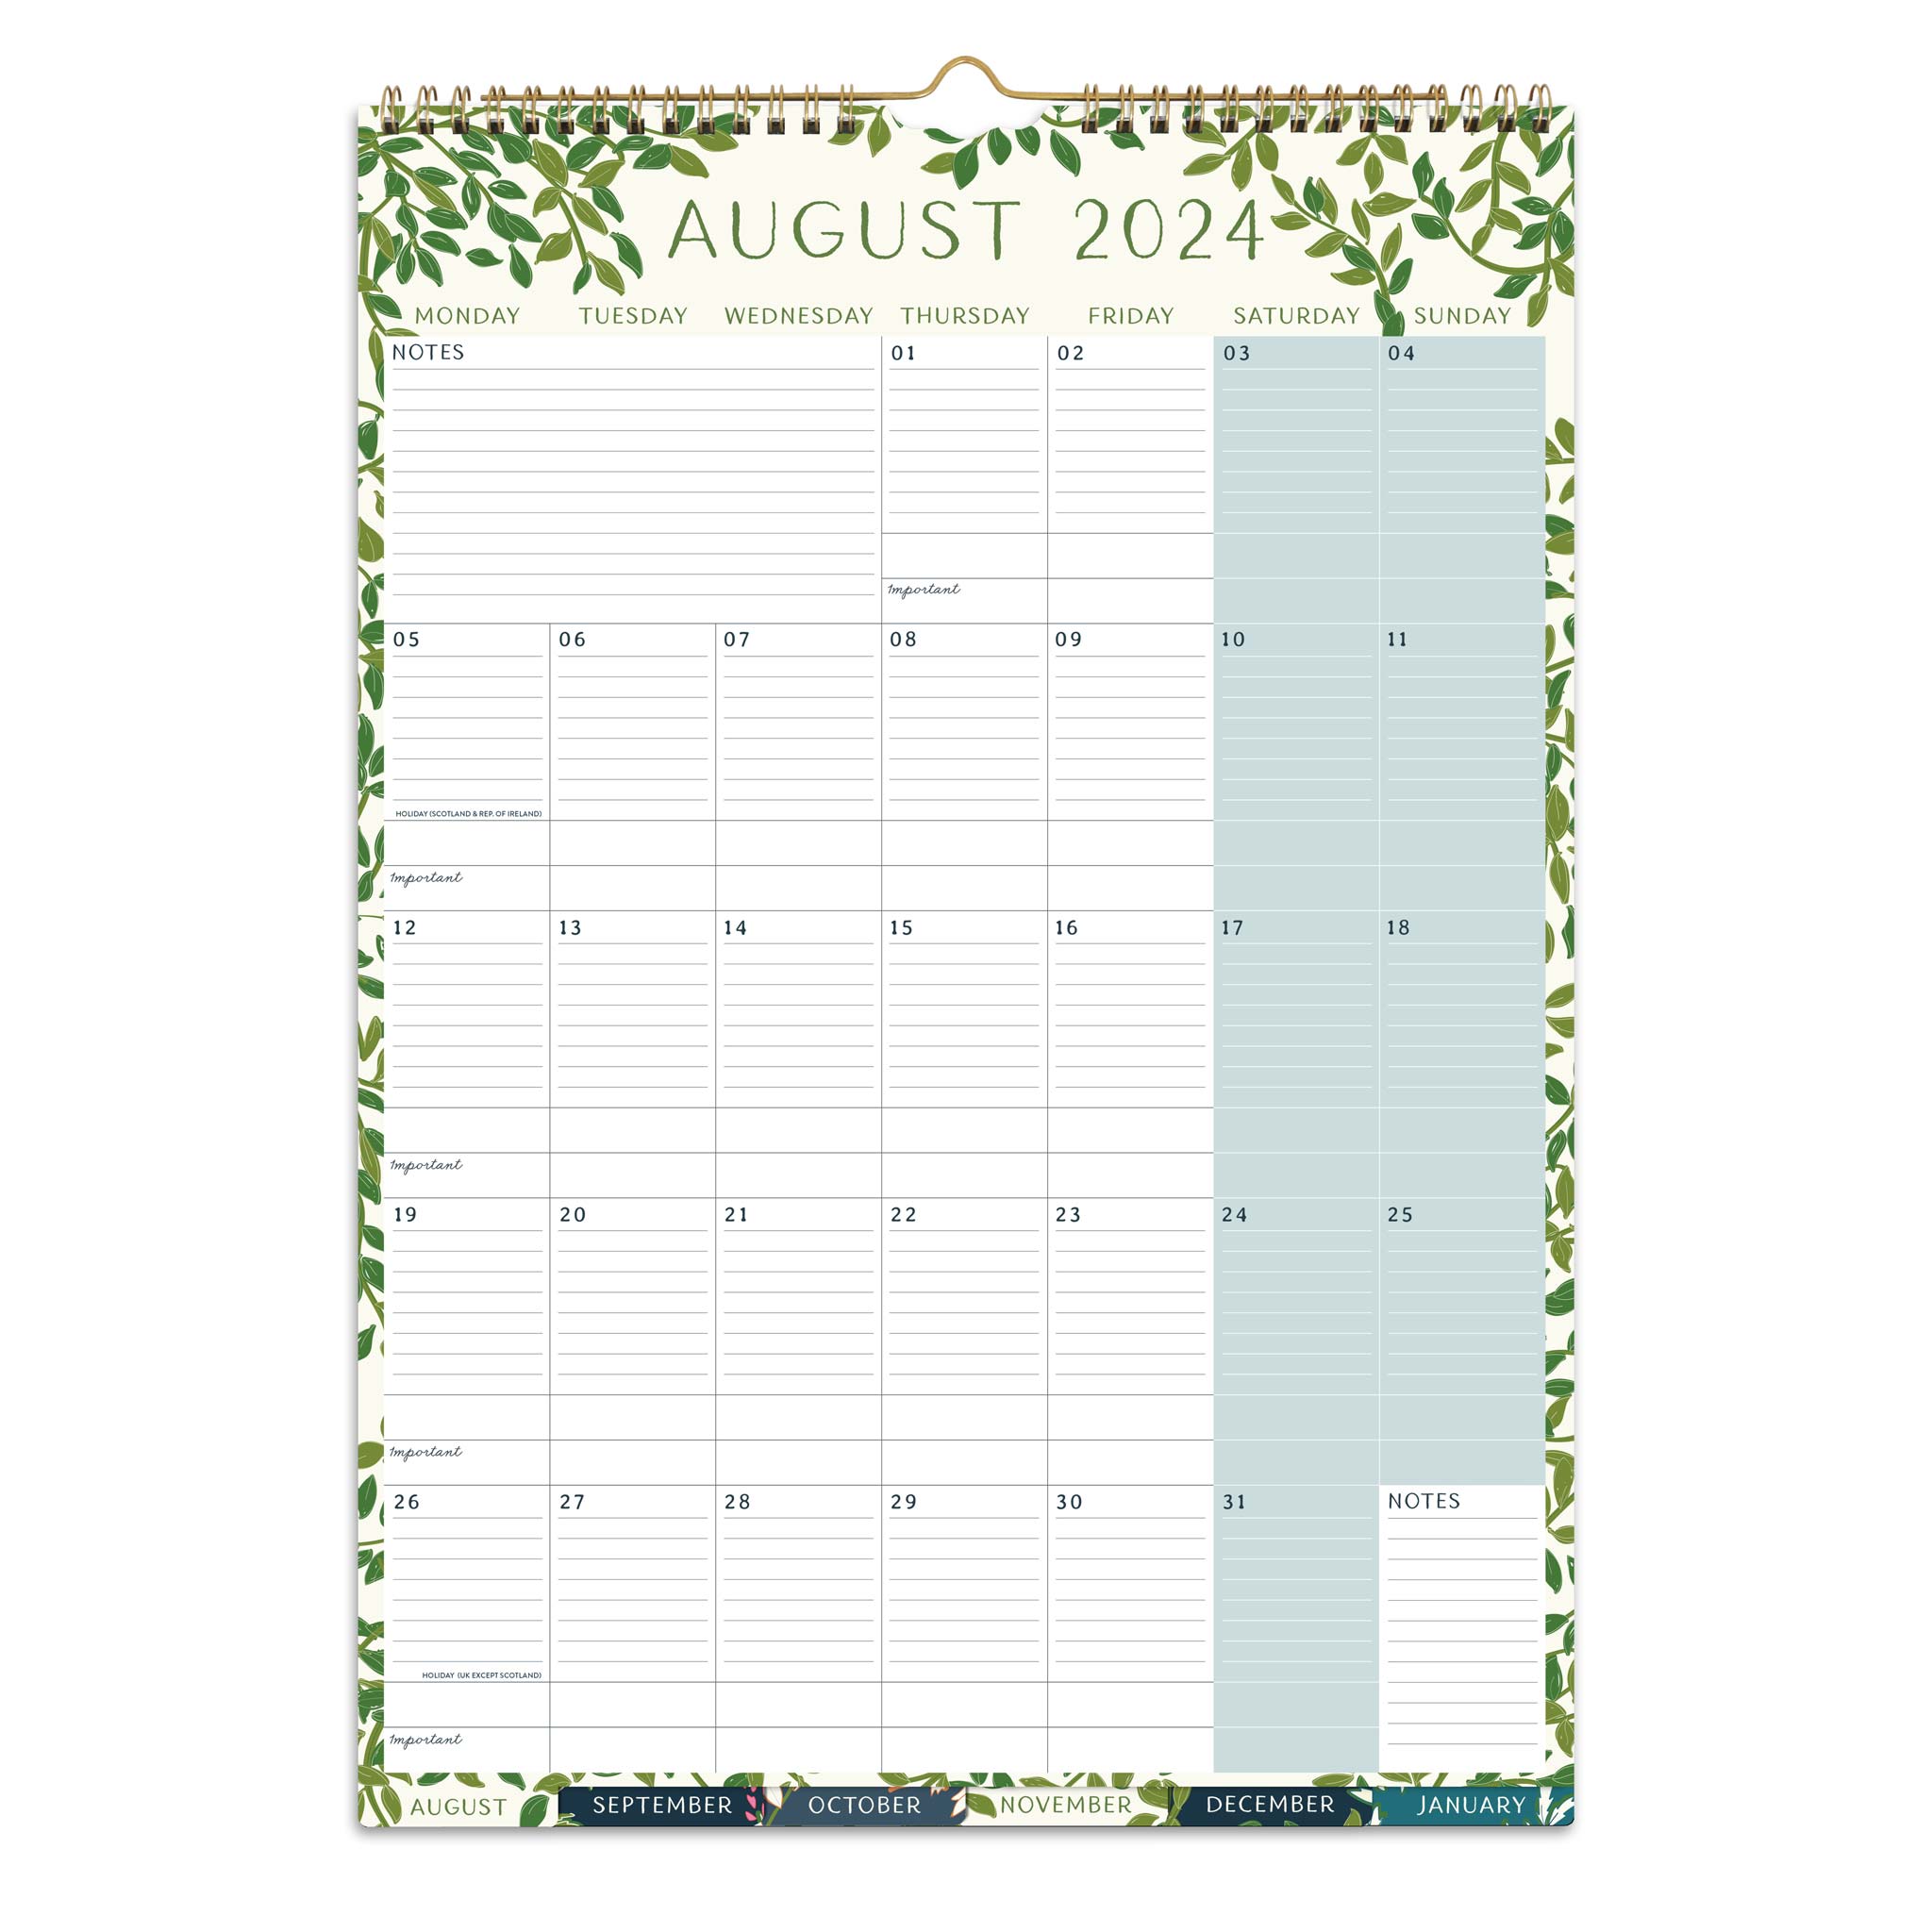 A wall calendar page for August 2024 with a green leaf pattern